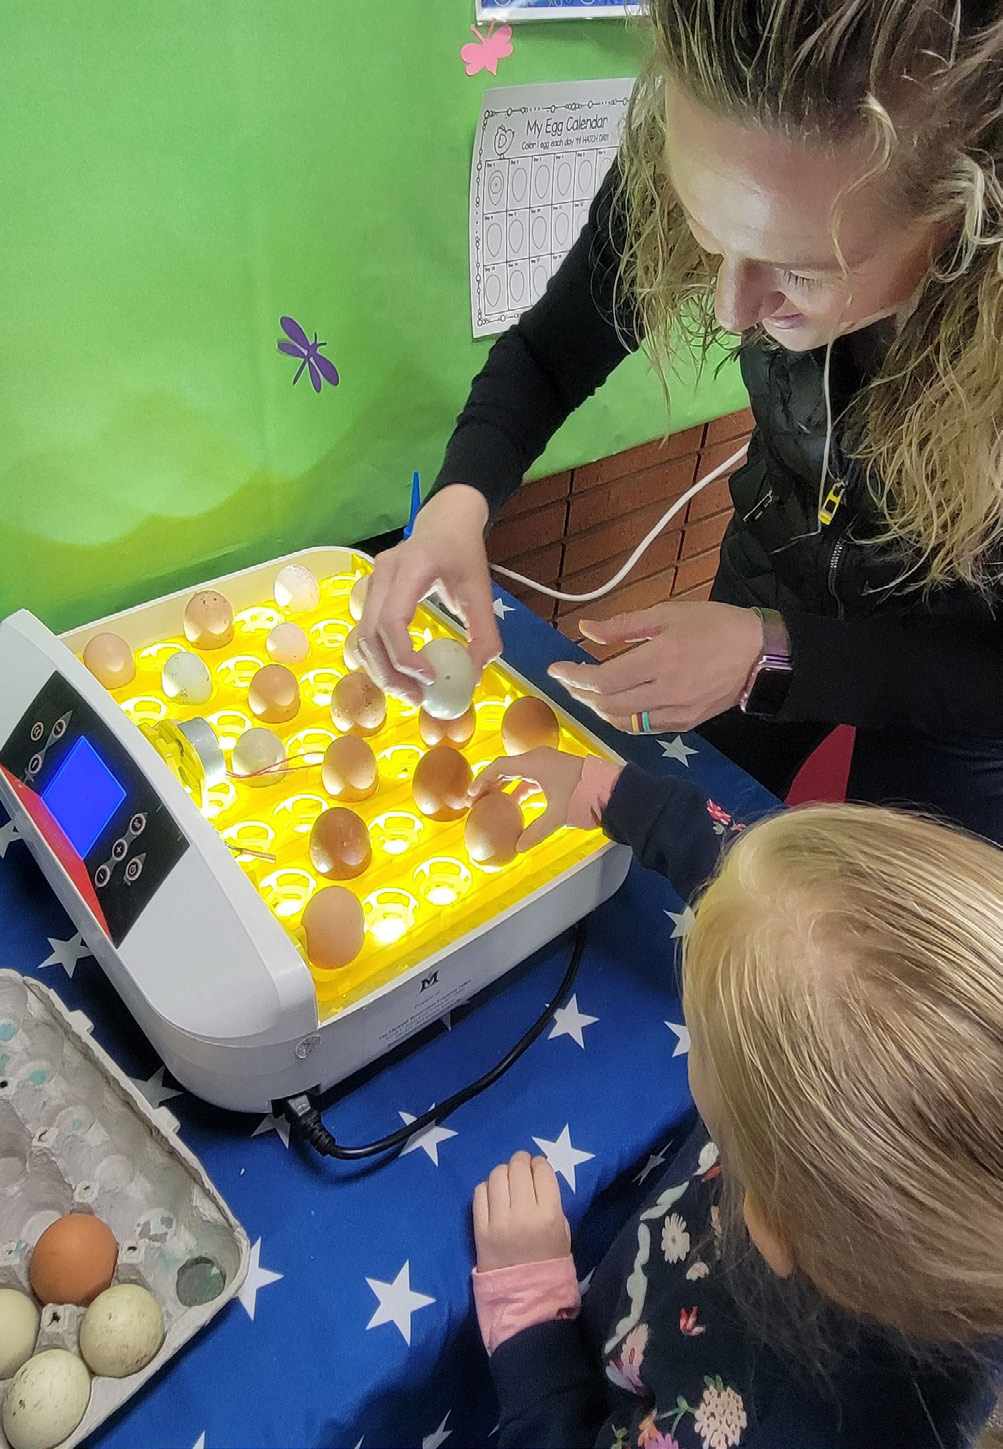 little girl and adult interacting with egg incubator.